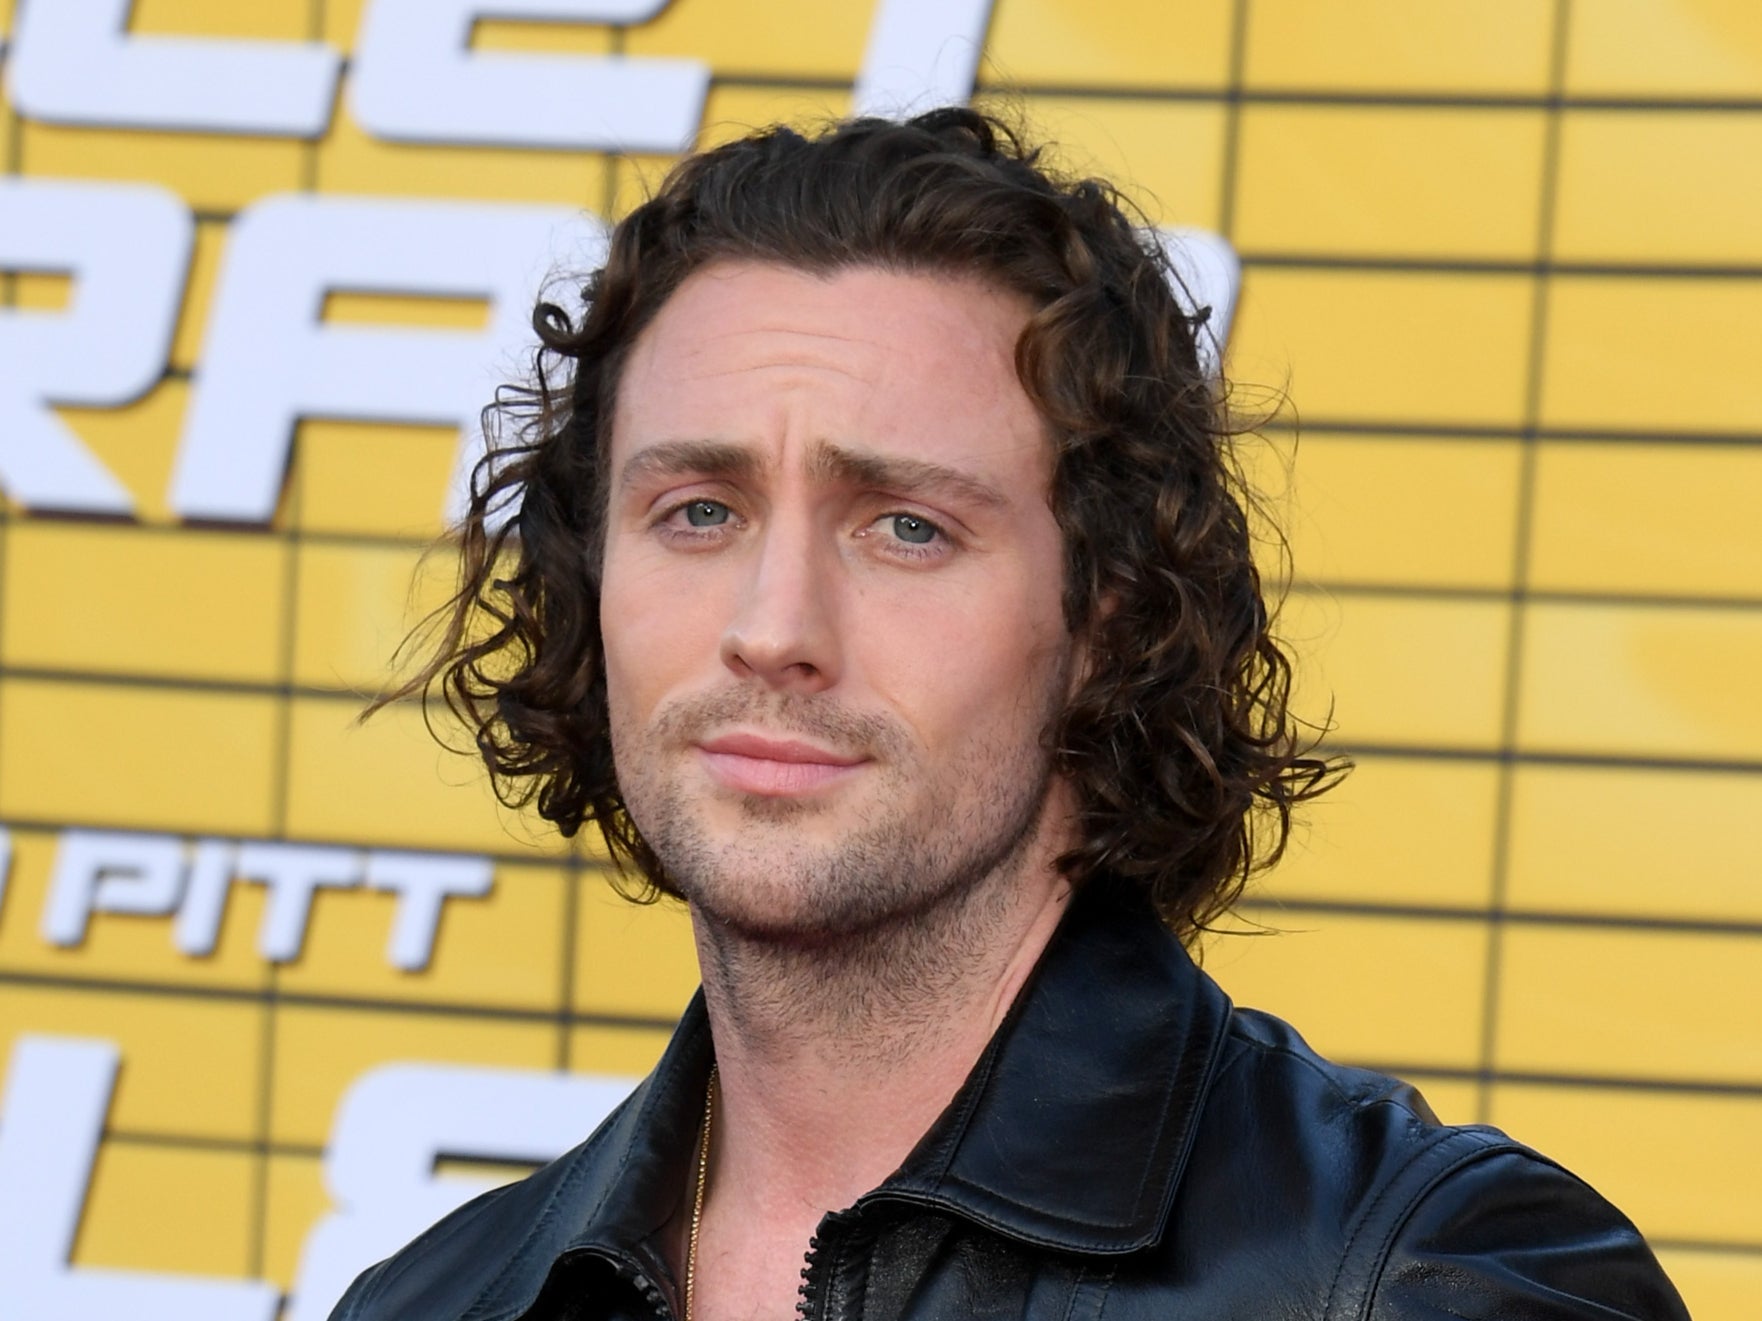 Aaron Taylor-Johnson’s credits include ‘Kick-Ass’, ‘Bullet Train’ and ‘Tenet’